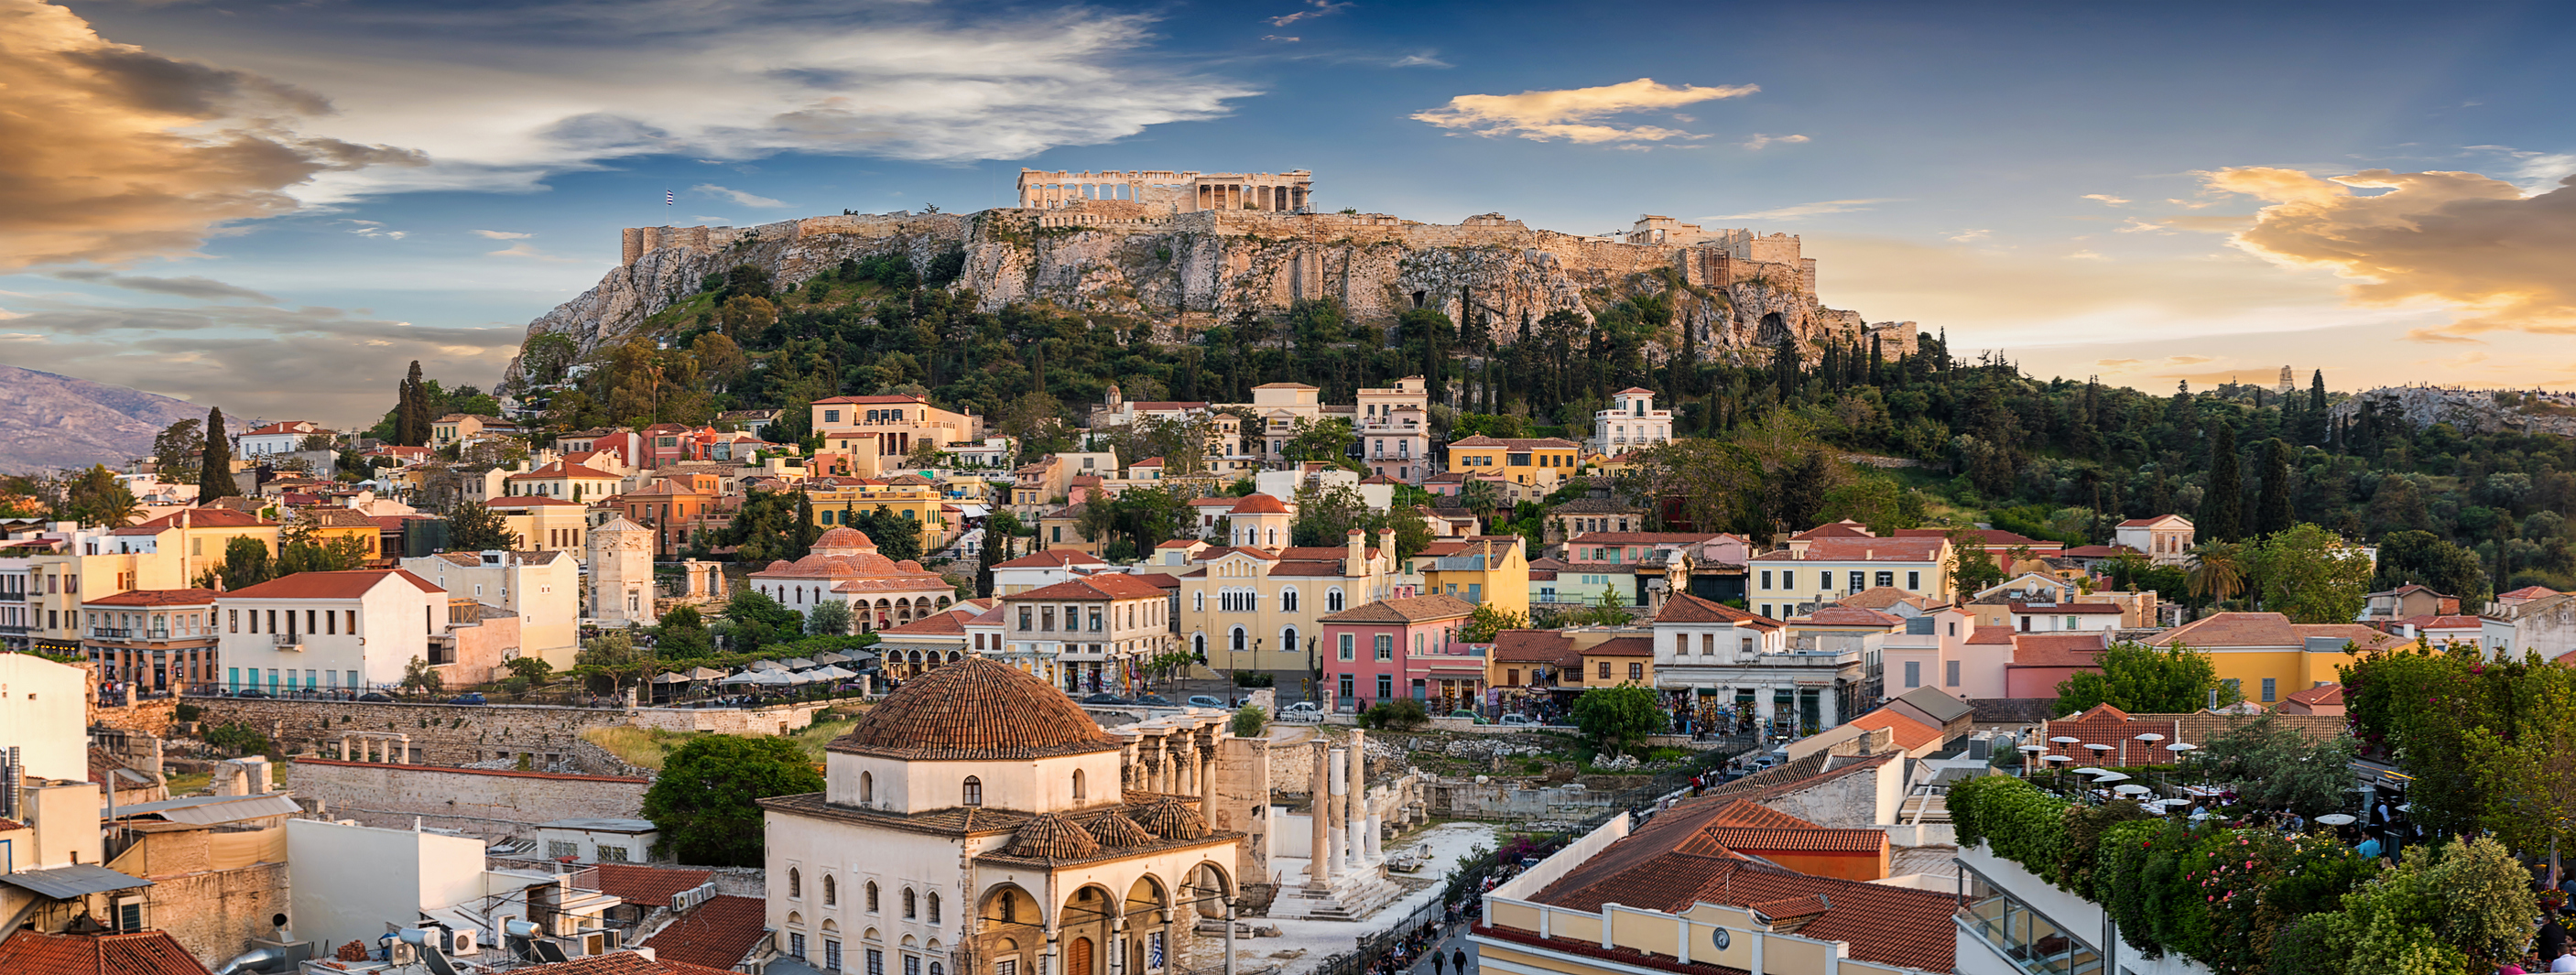 National Bank of Greece Chooses SAP SuccessFactors to Drive Innovation and Exceptional Employee Experience